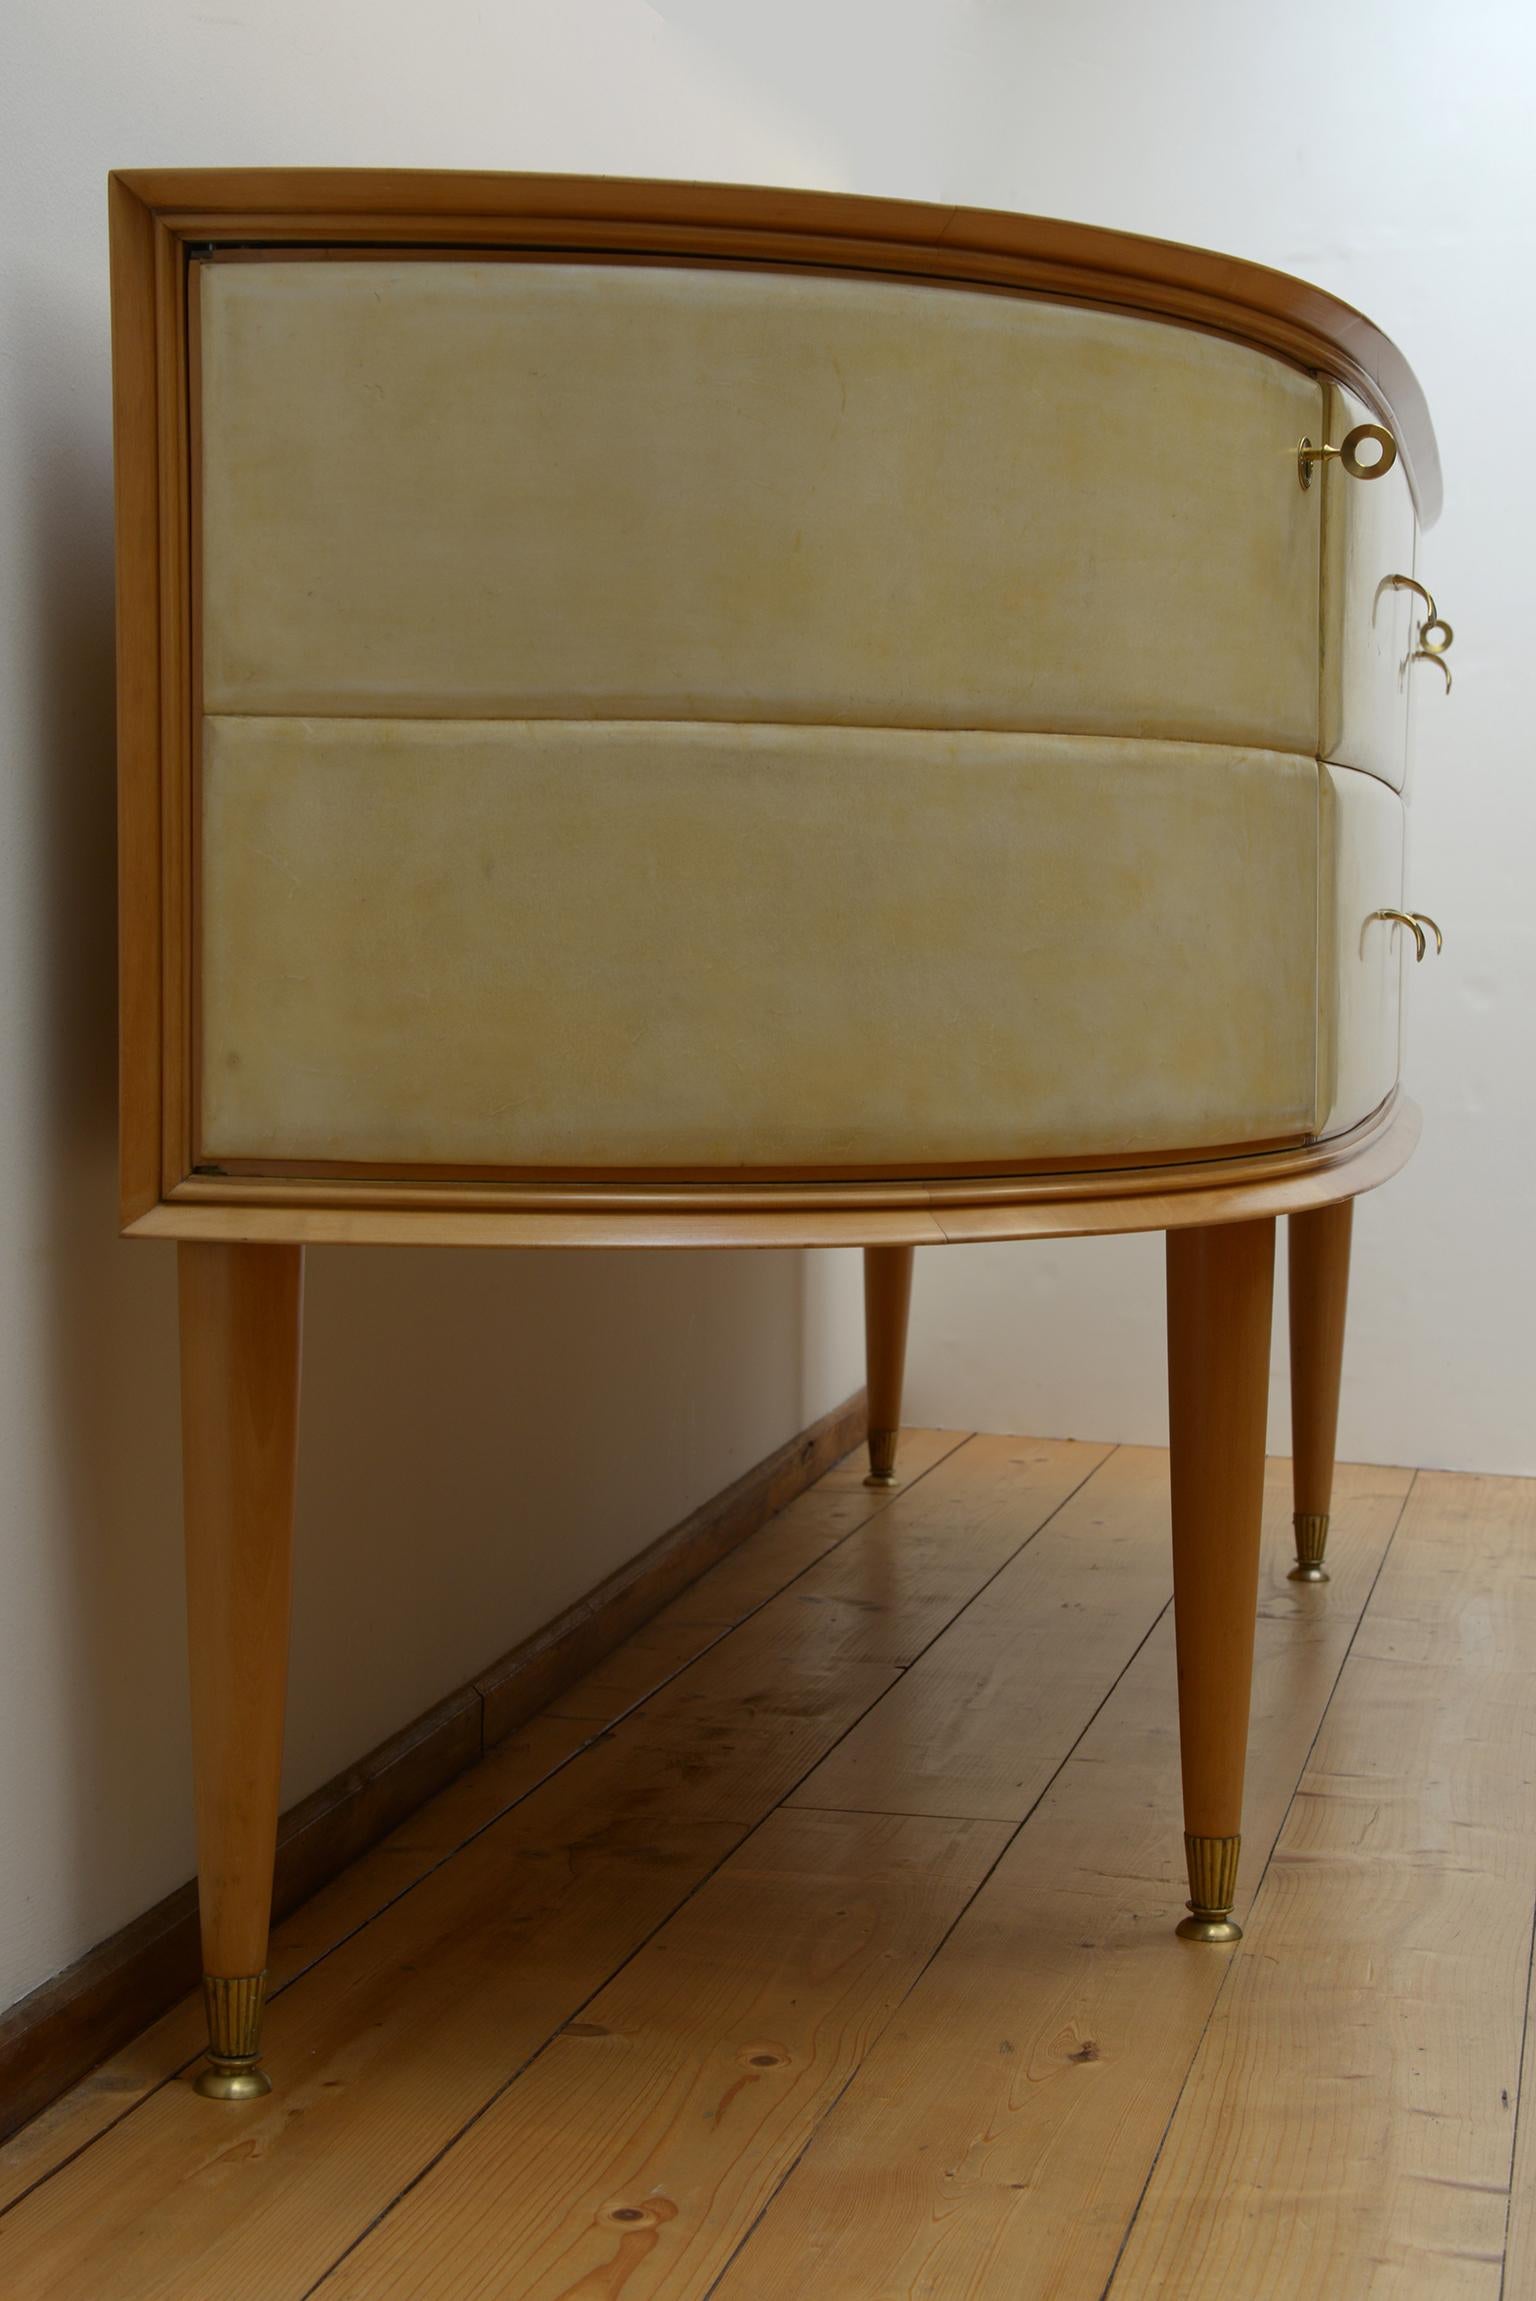 Midcentury Valzania Curved Chest or Sideboard Encased Peach-Colored Mirror Top In Good Condition For Sale In Firenze, Toscana